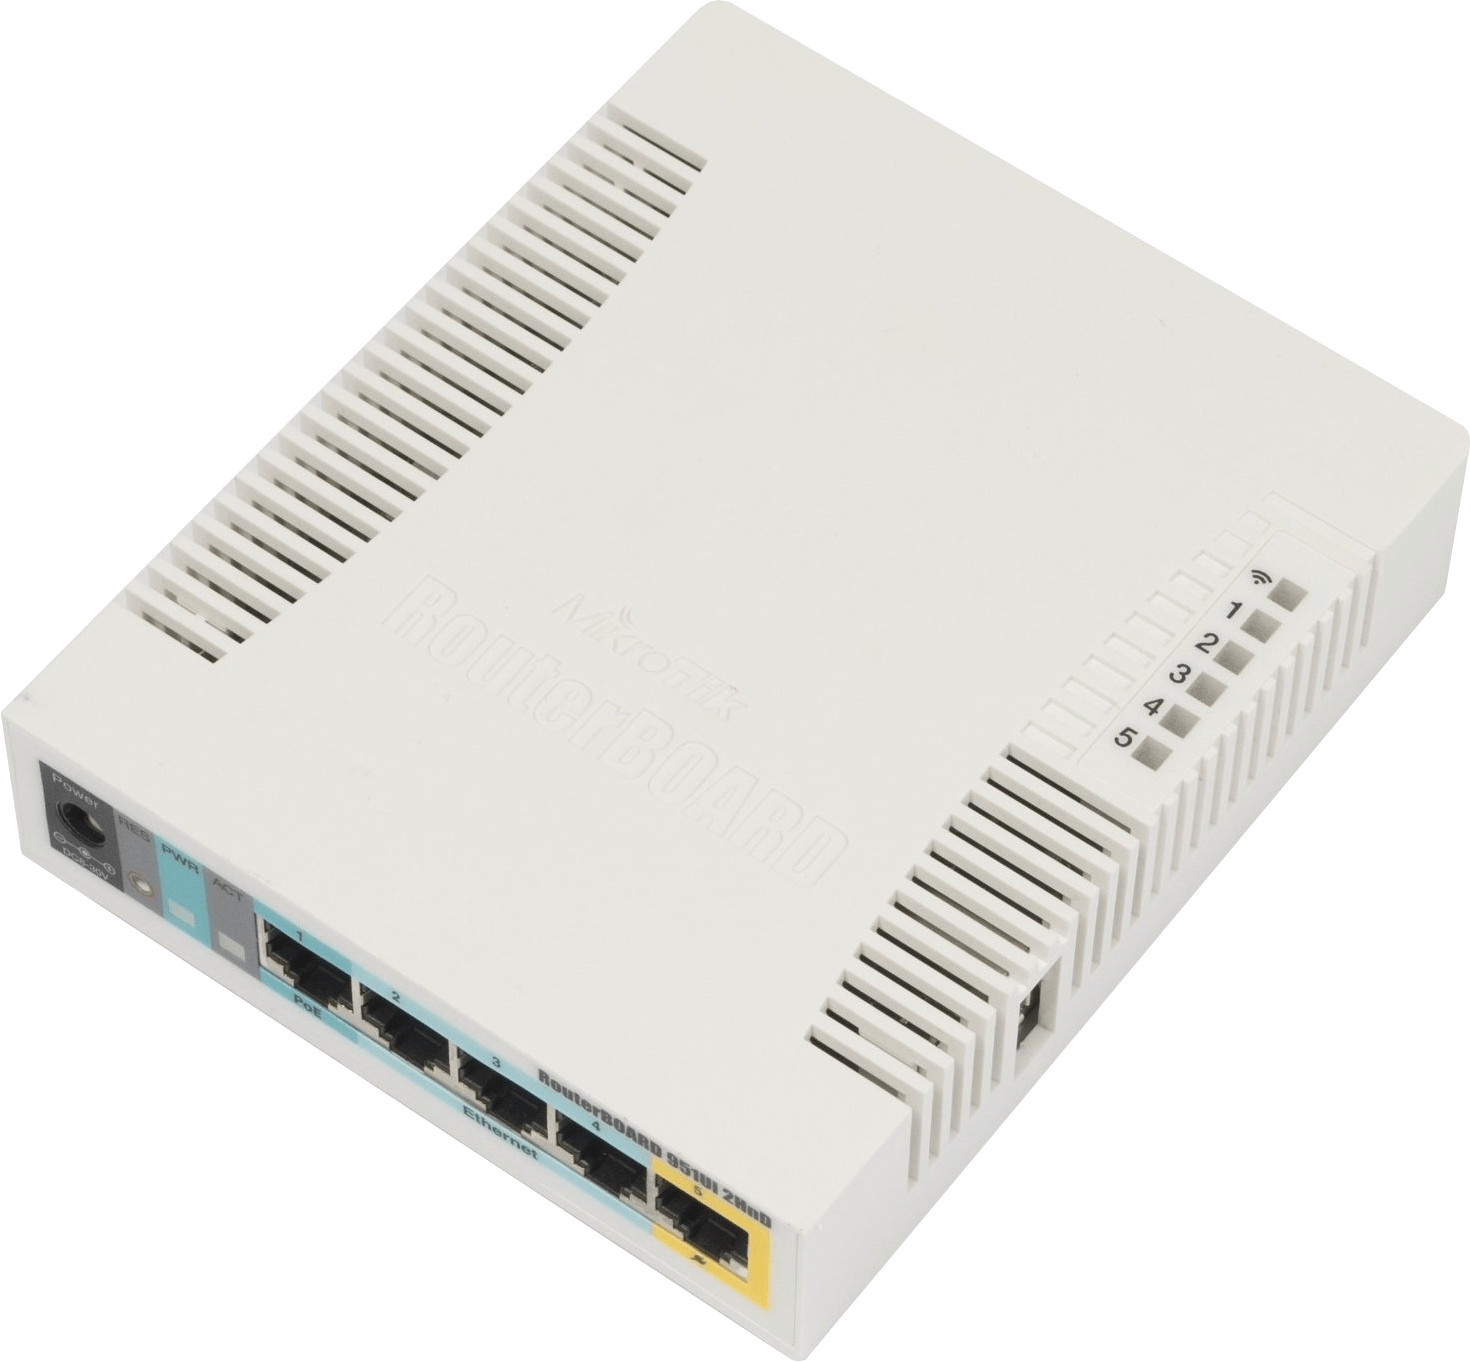 Buy MikroTik RB951Ui-2HnD from £43.32 (Today) – Best Deals on idealo.co.uk